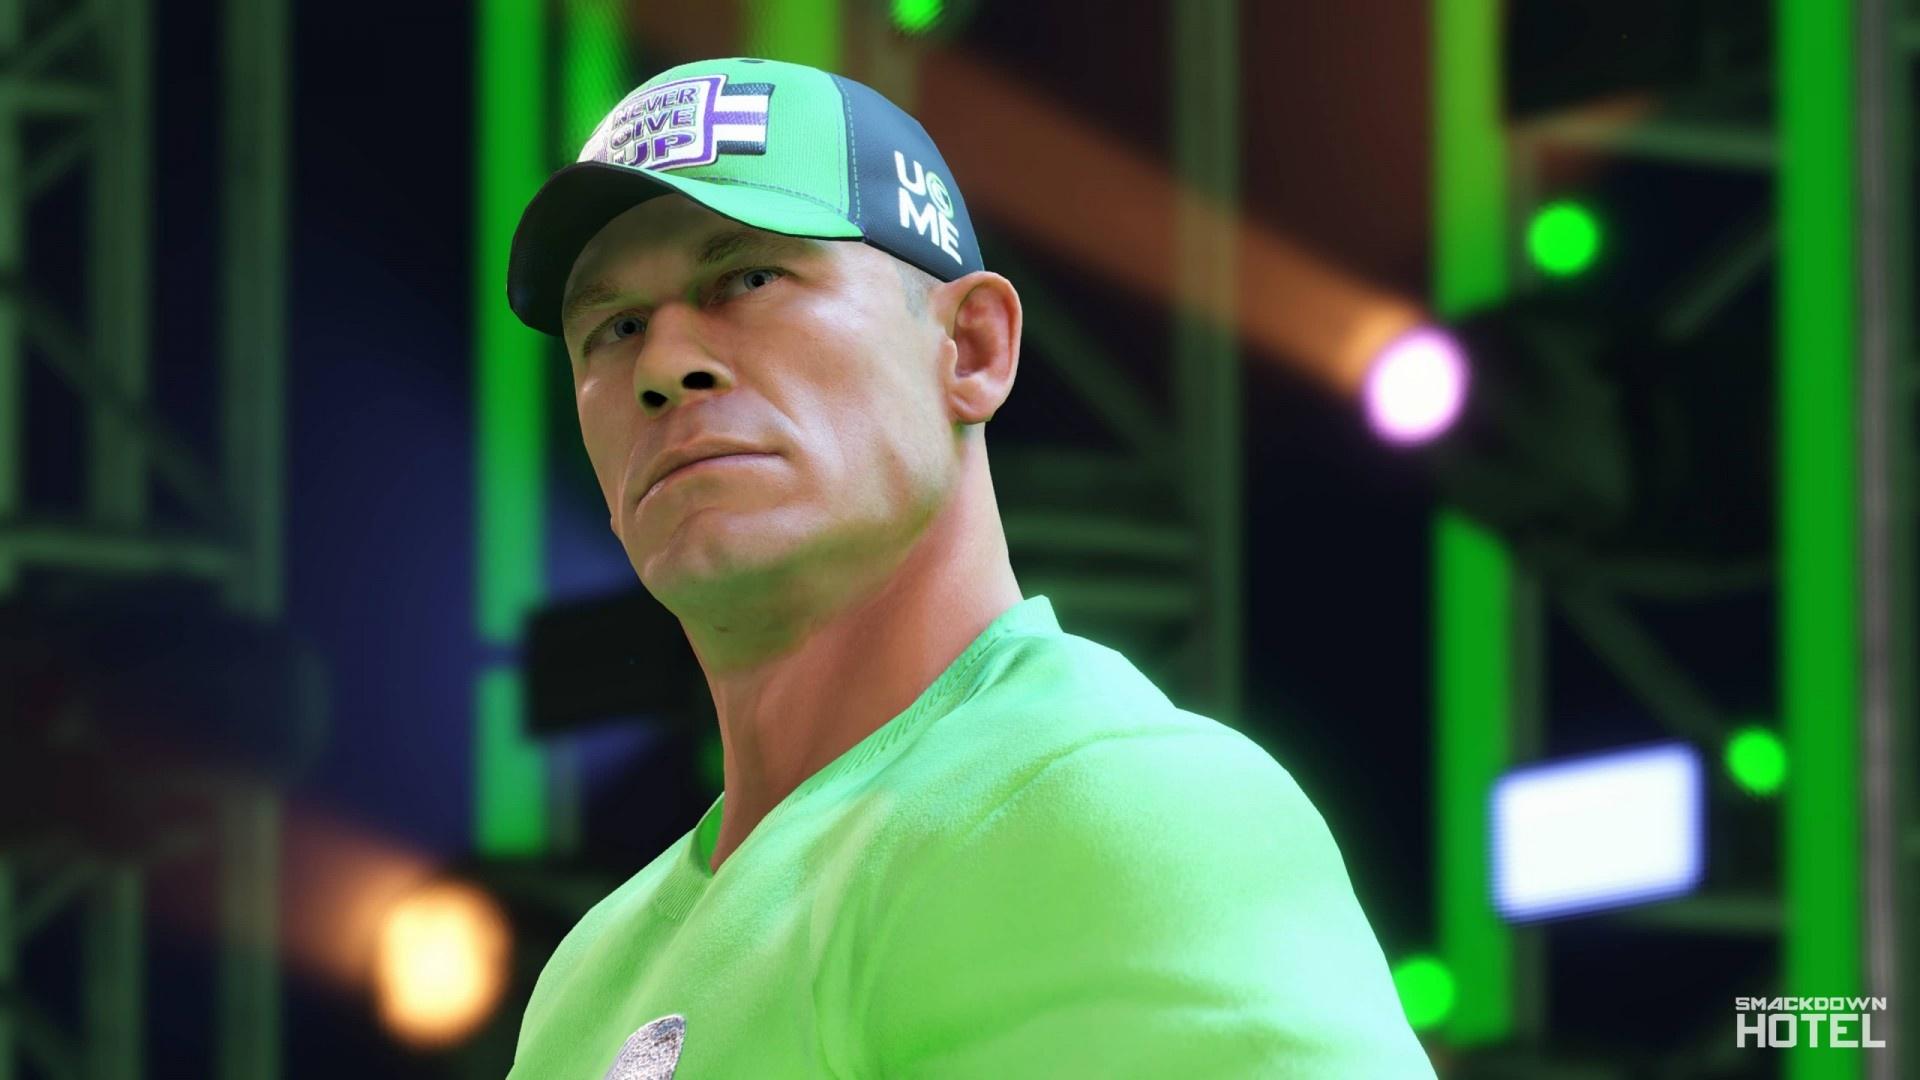 WWE 2K22: Will John Cena Be On The Roster?